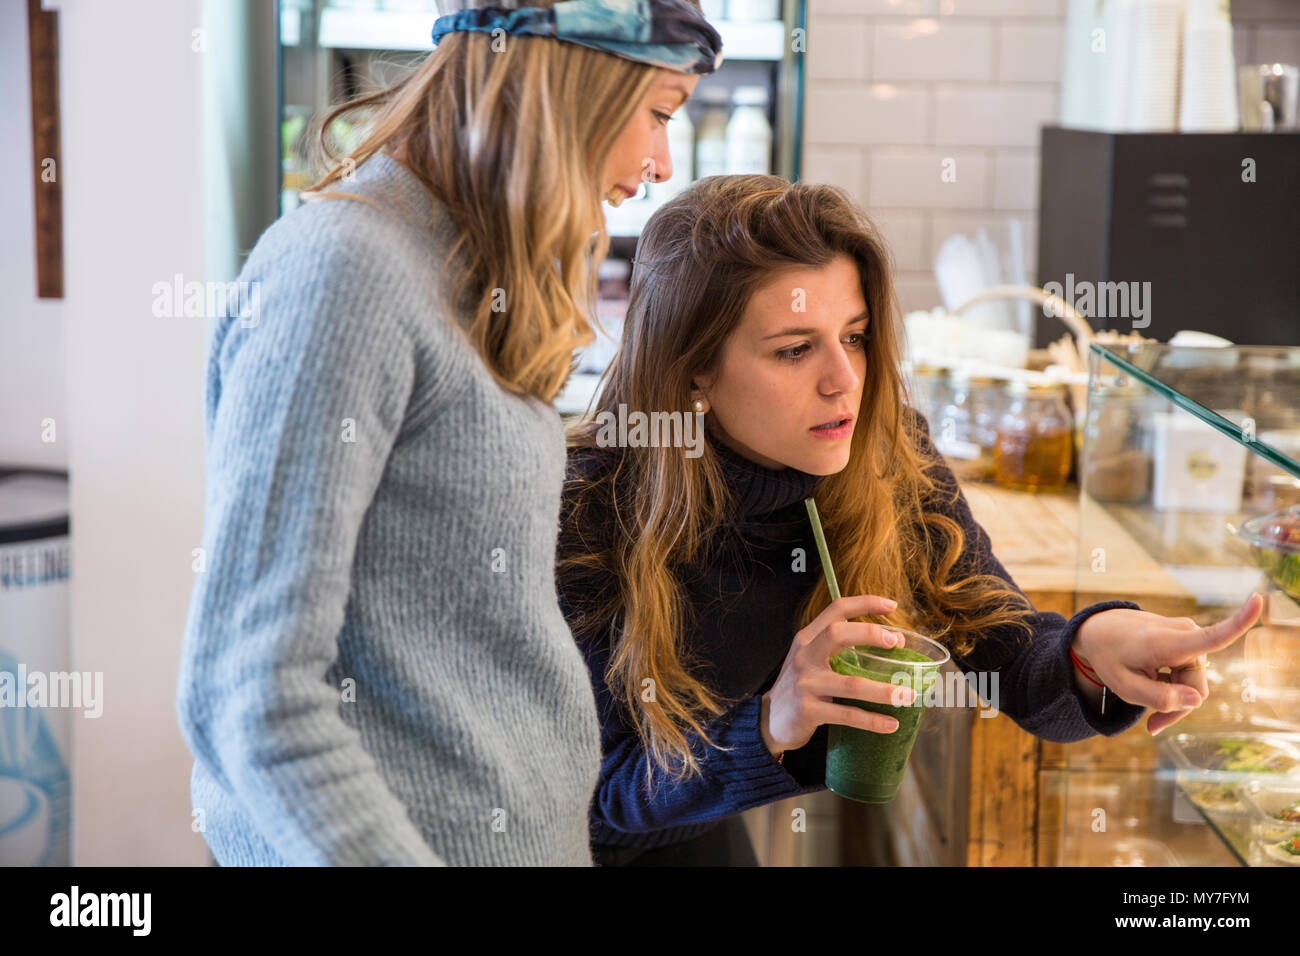 Young woman and friend looking at fresh food display cabinet in cafe Stock Photo